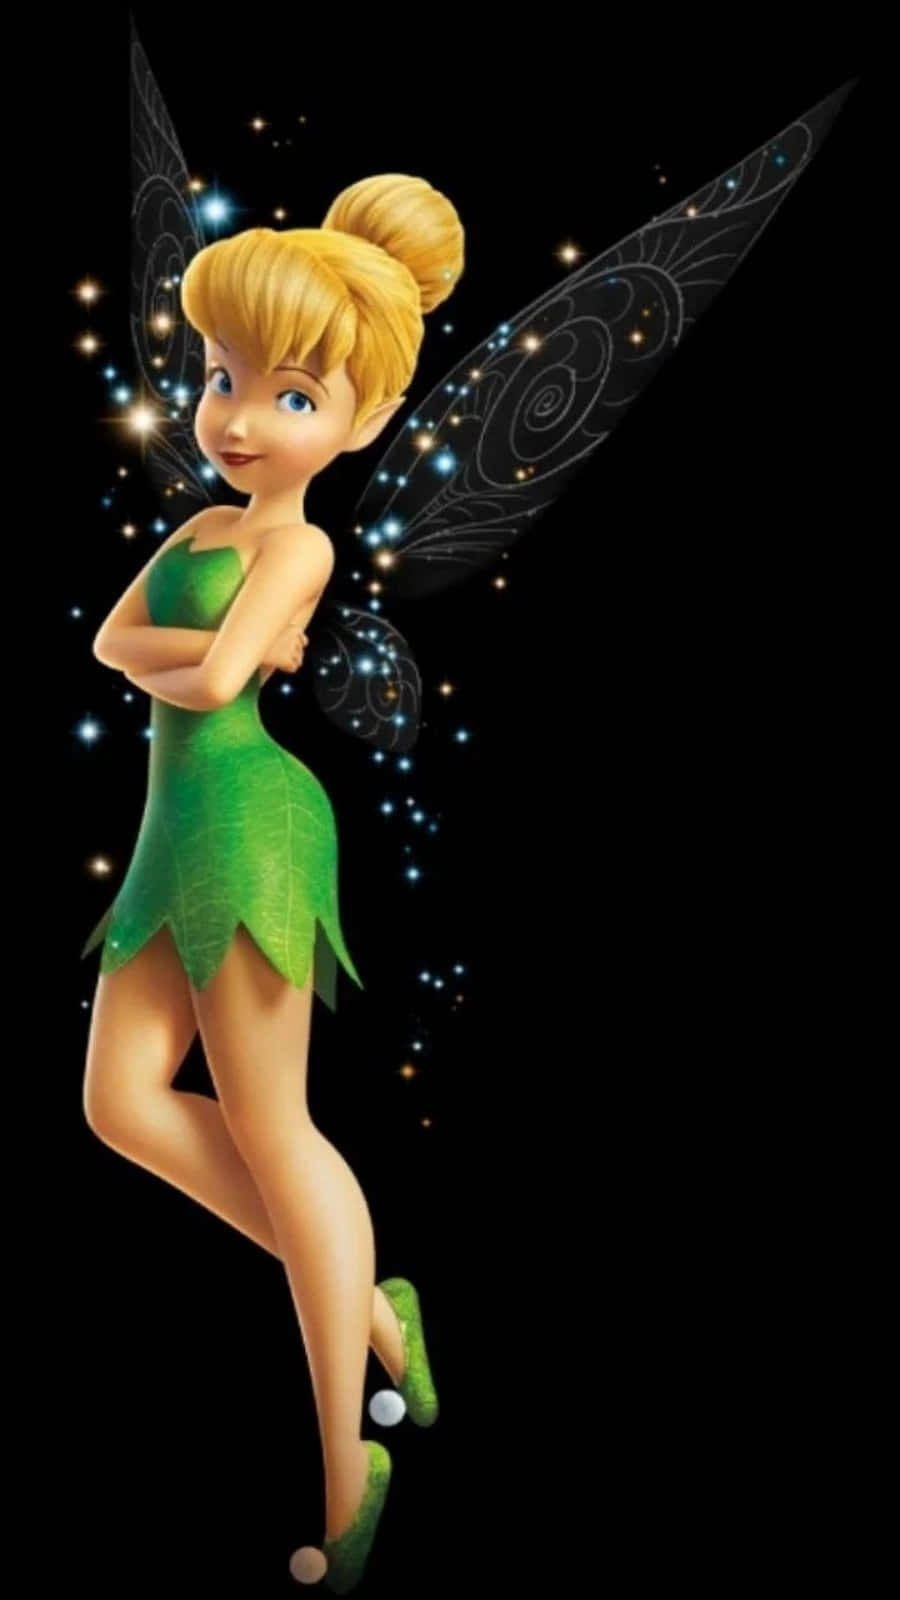 A classic Tinkerbell moment - flying through the night sky